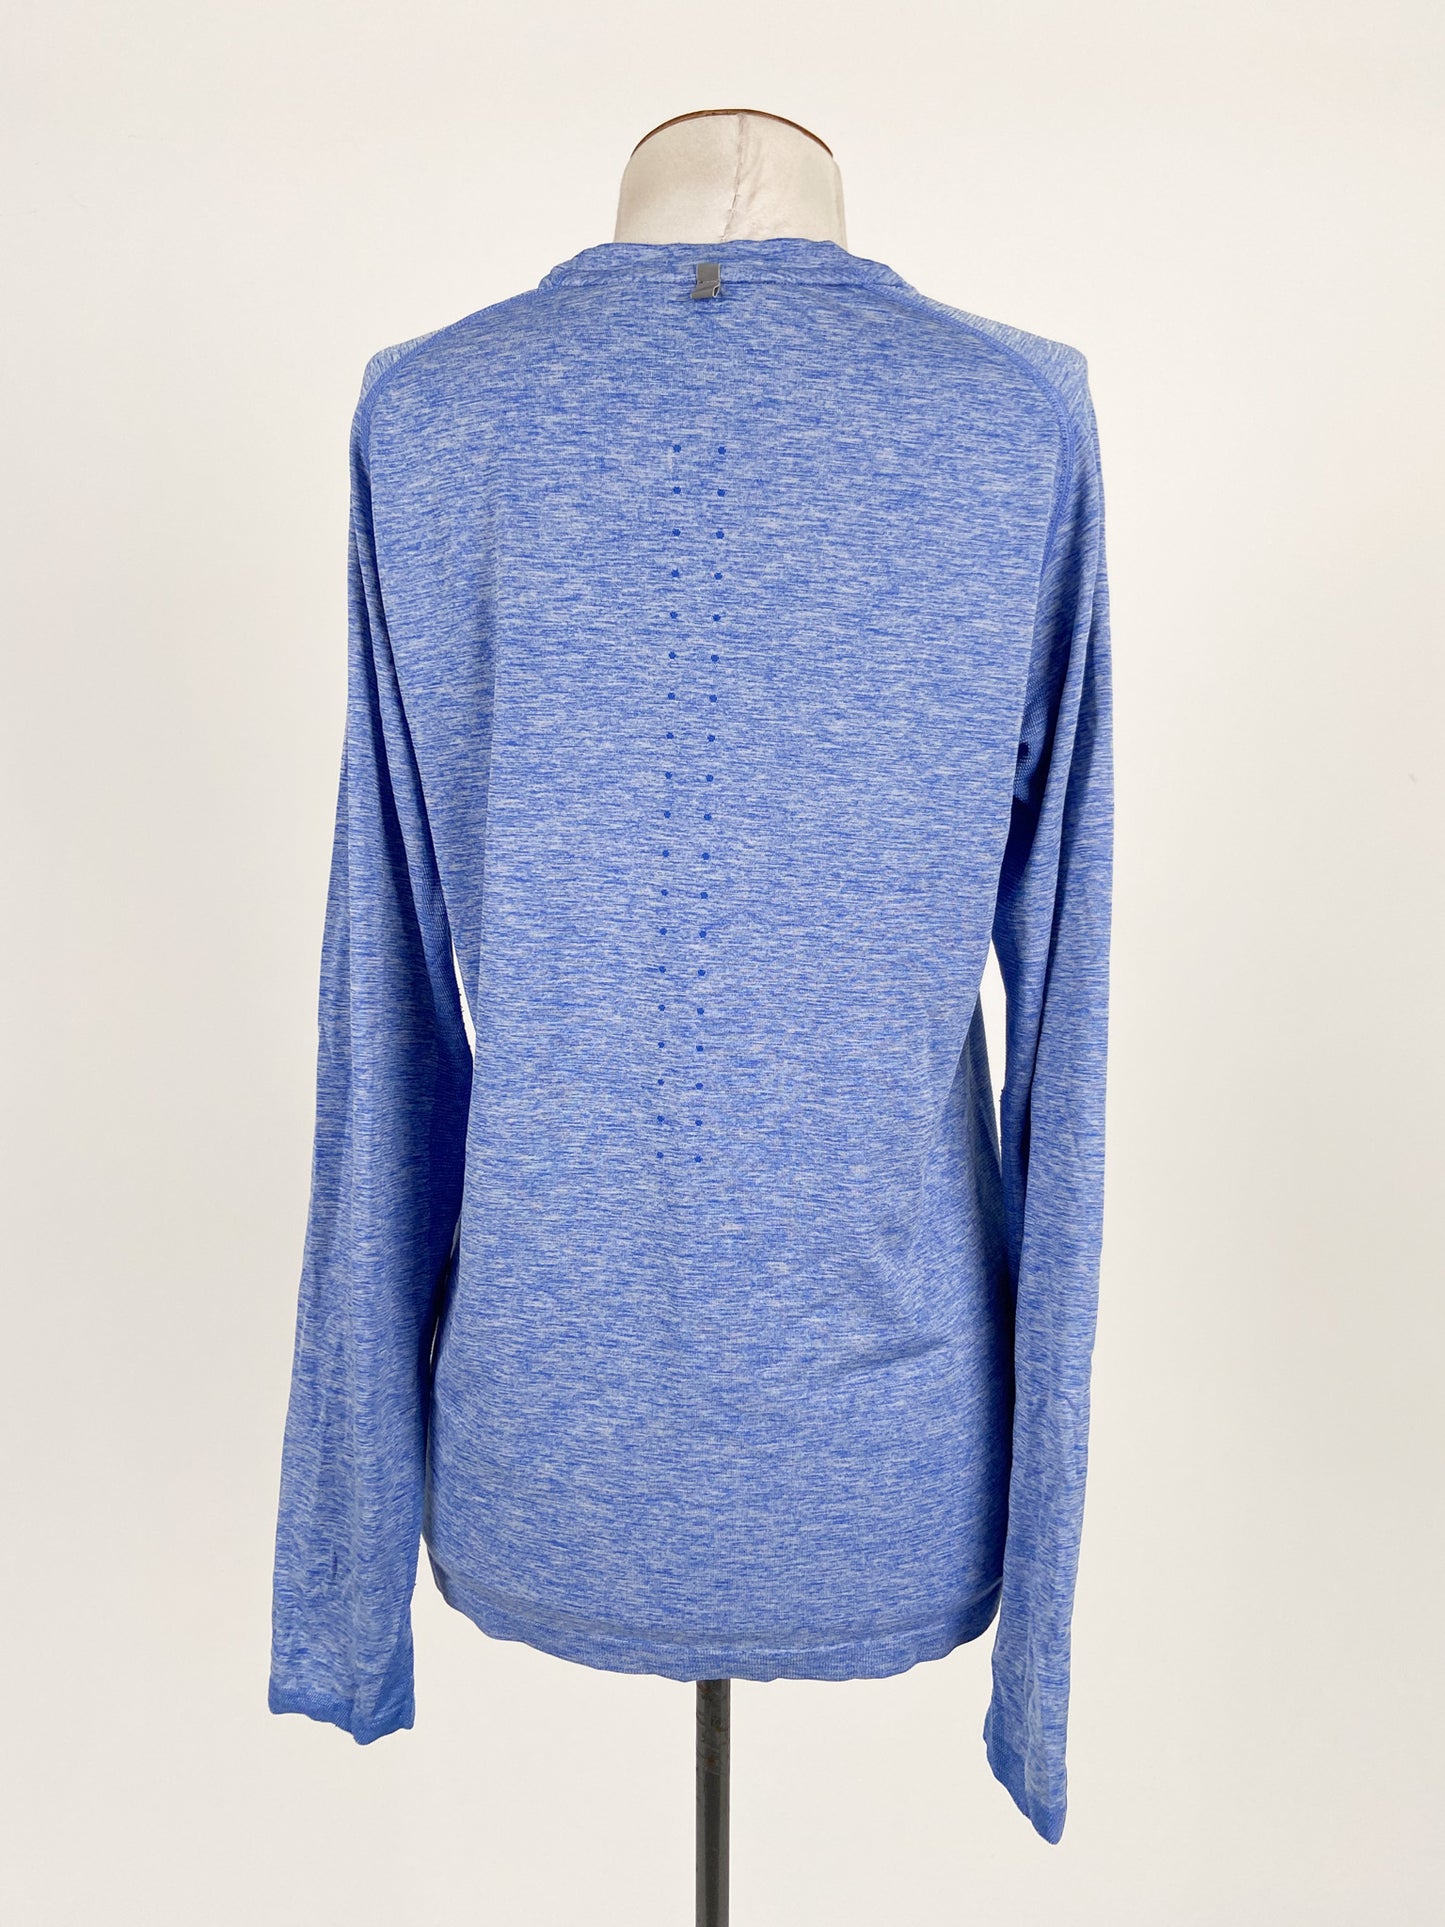 Nike | Blue Casual Activewear Top | Size S